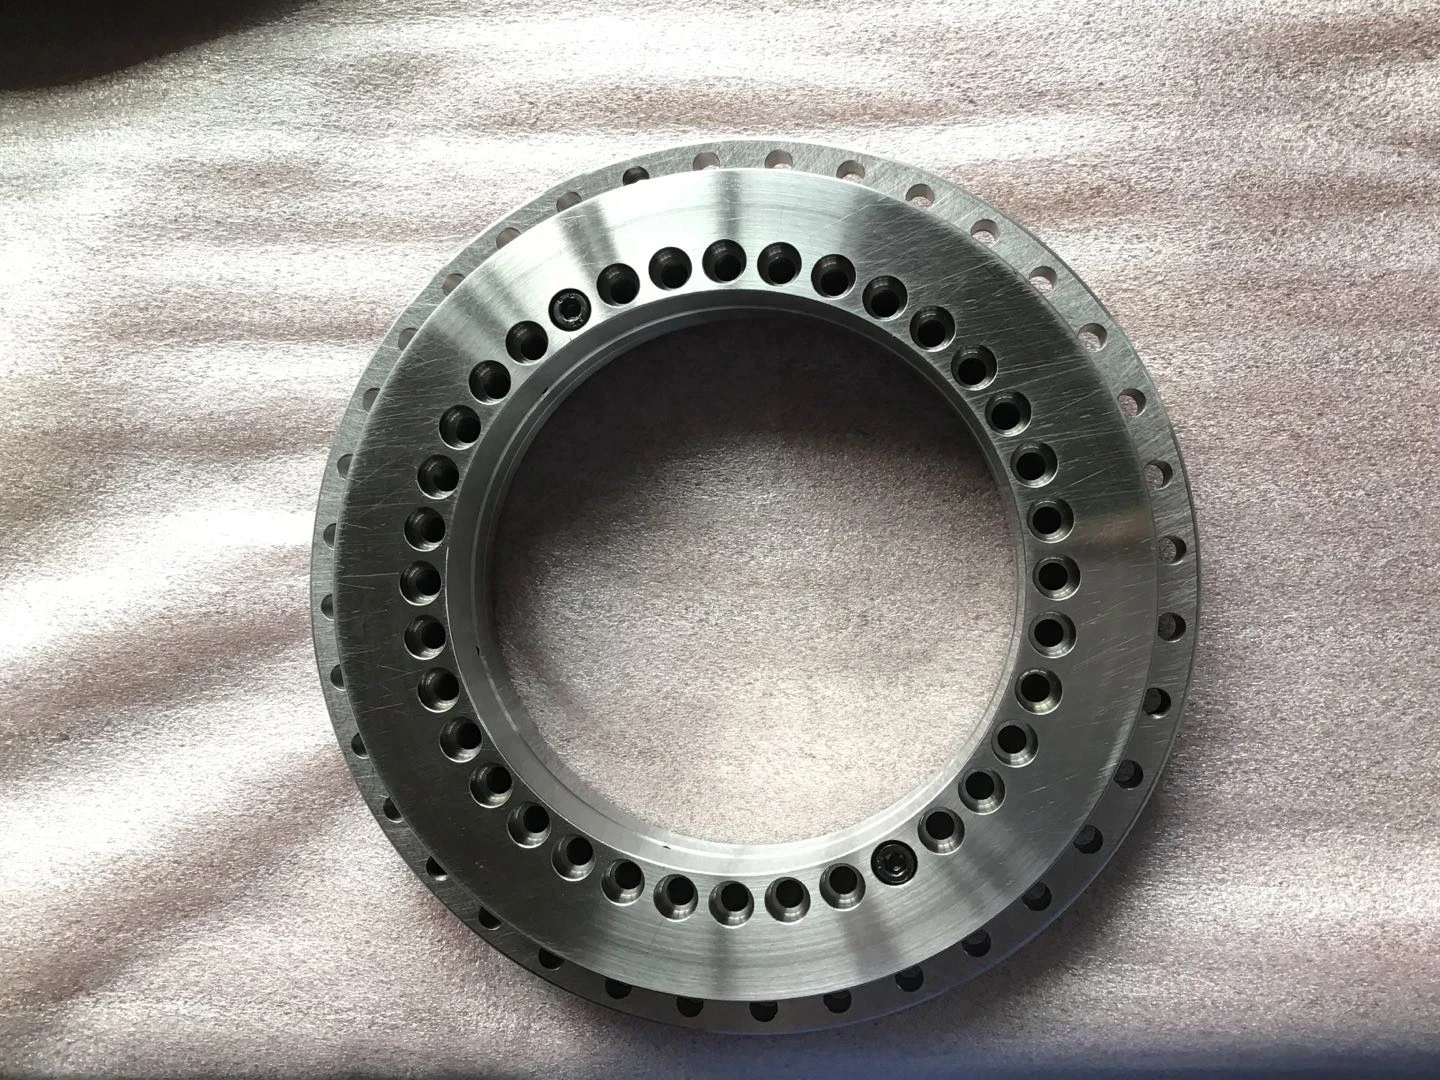 zrt cylindrical roller bearing/zrt bearing for 5 axis rotary table